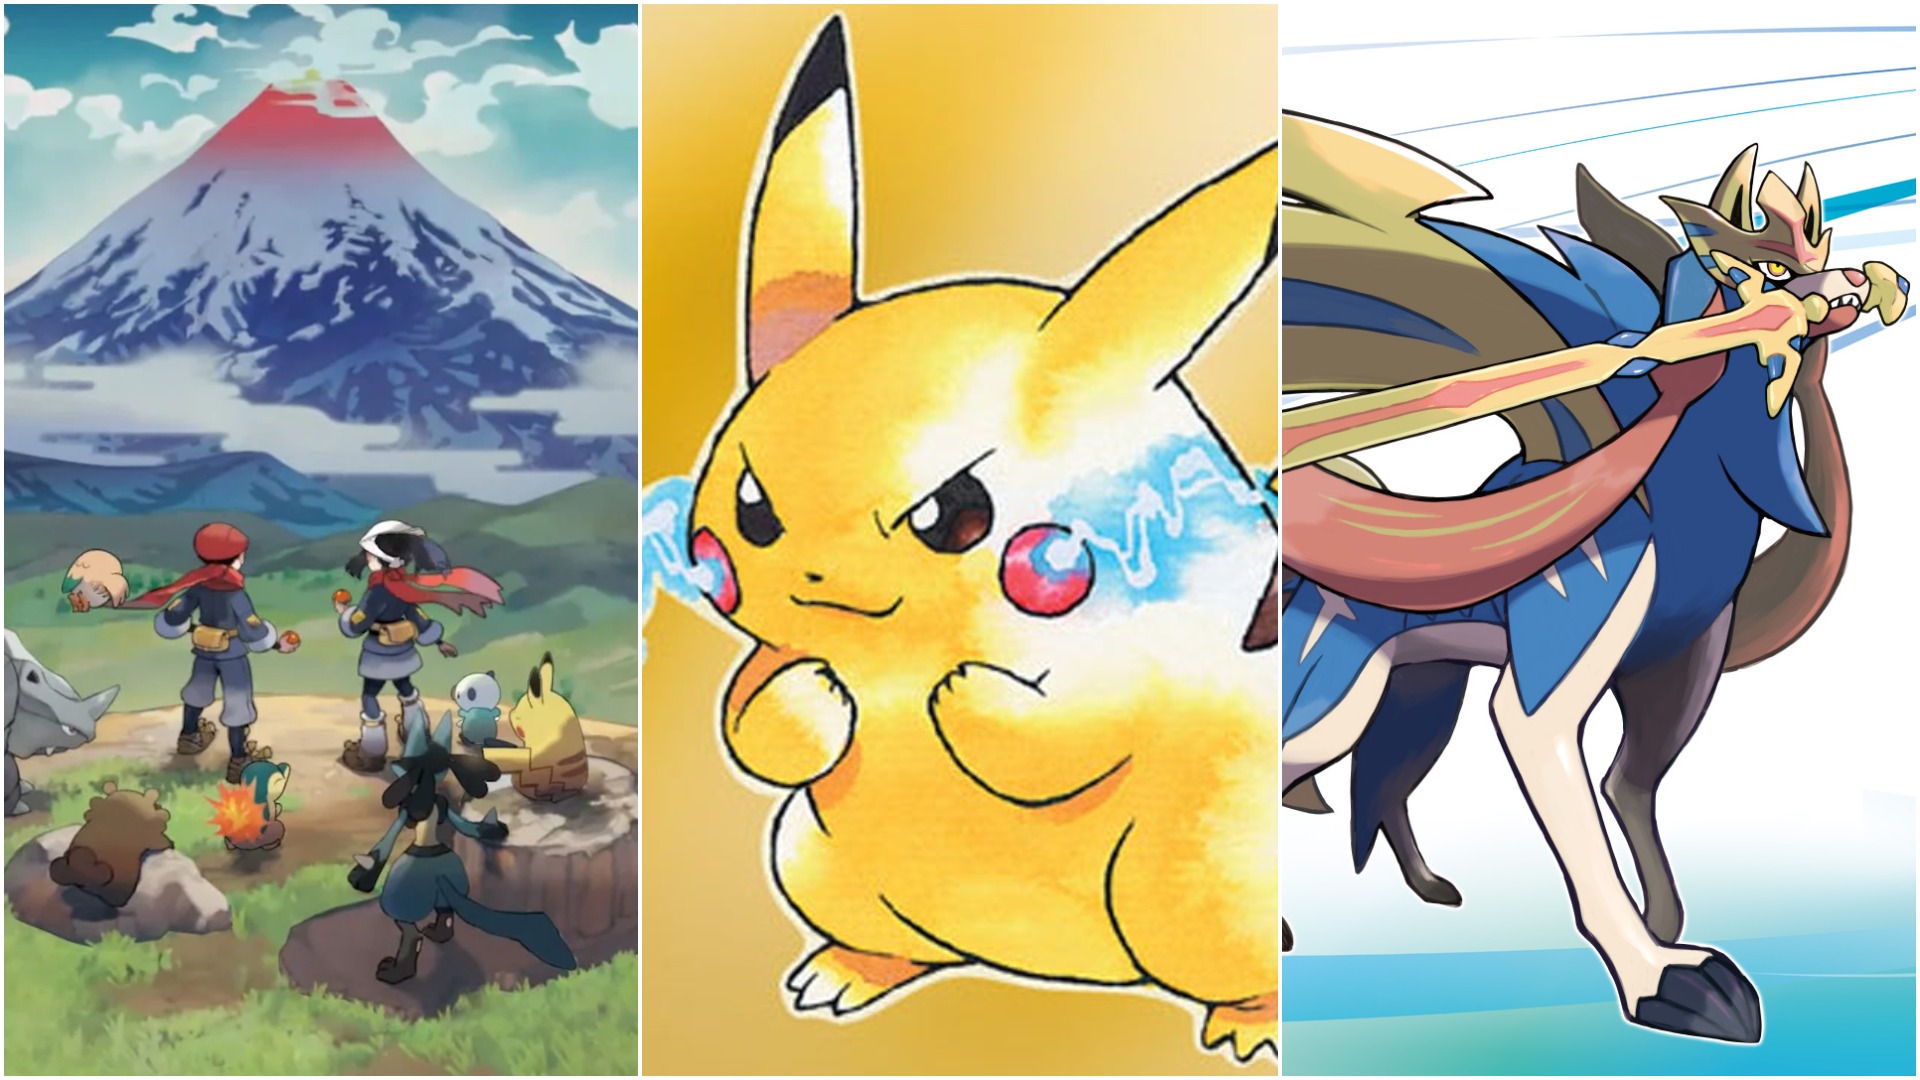 A new main series Pokémon game is coming in late 2022